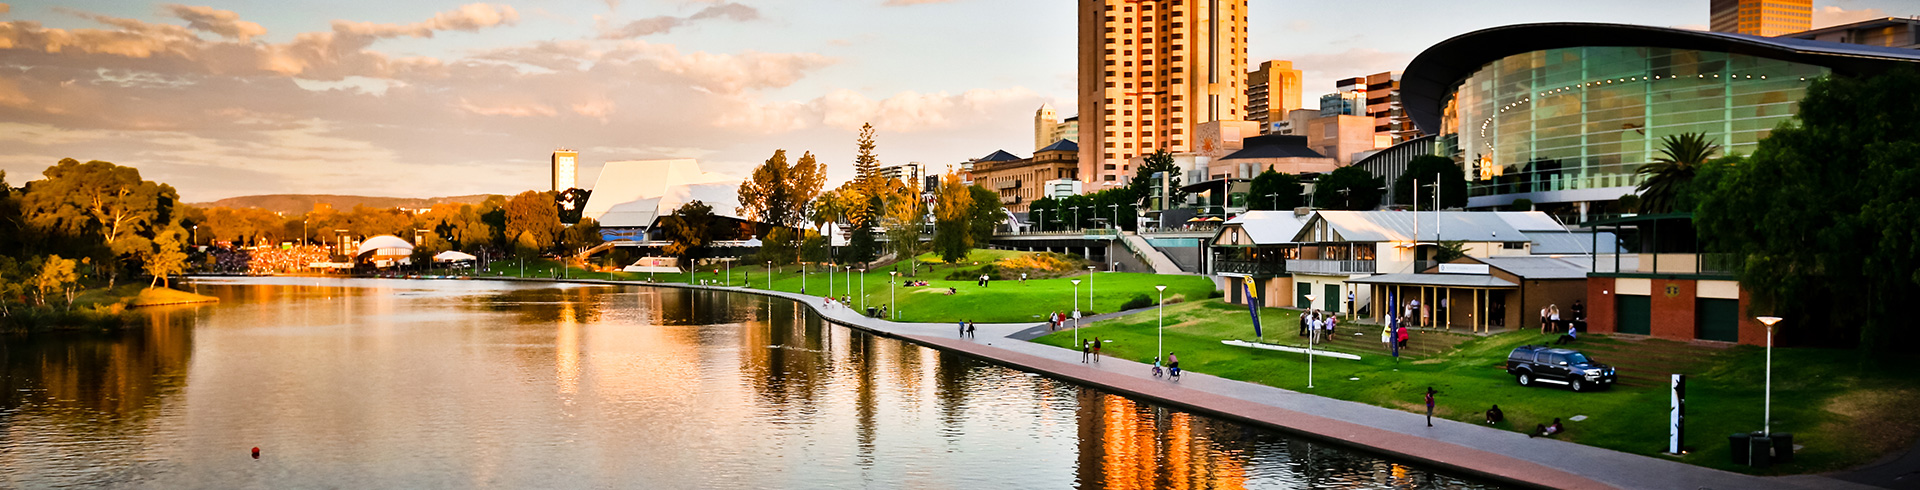 Discounted flight tickets to Adelaide - IFlyFirstClass